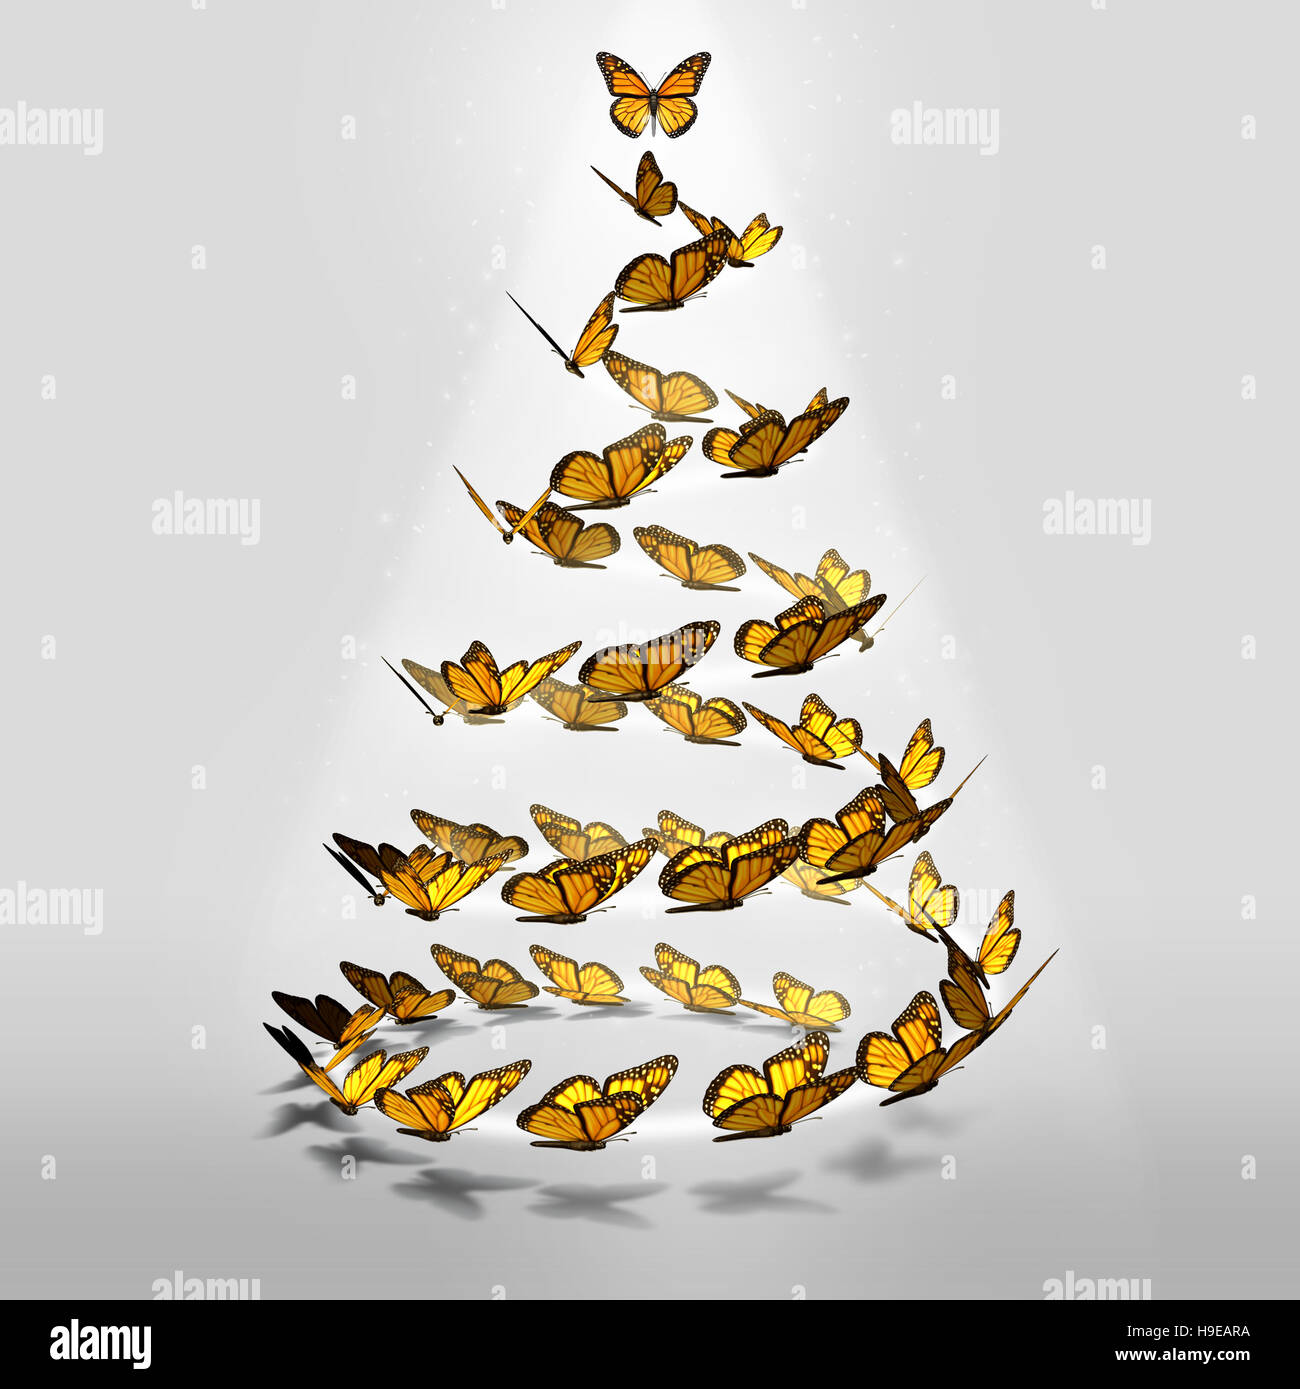 Butterfly Christmas tree as a magical winter holiday group of butterflies shaped as an evergreen pine as a festive seasonal symbol for hope and joy in Stock Photo